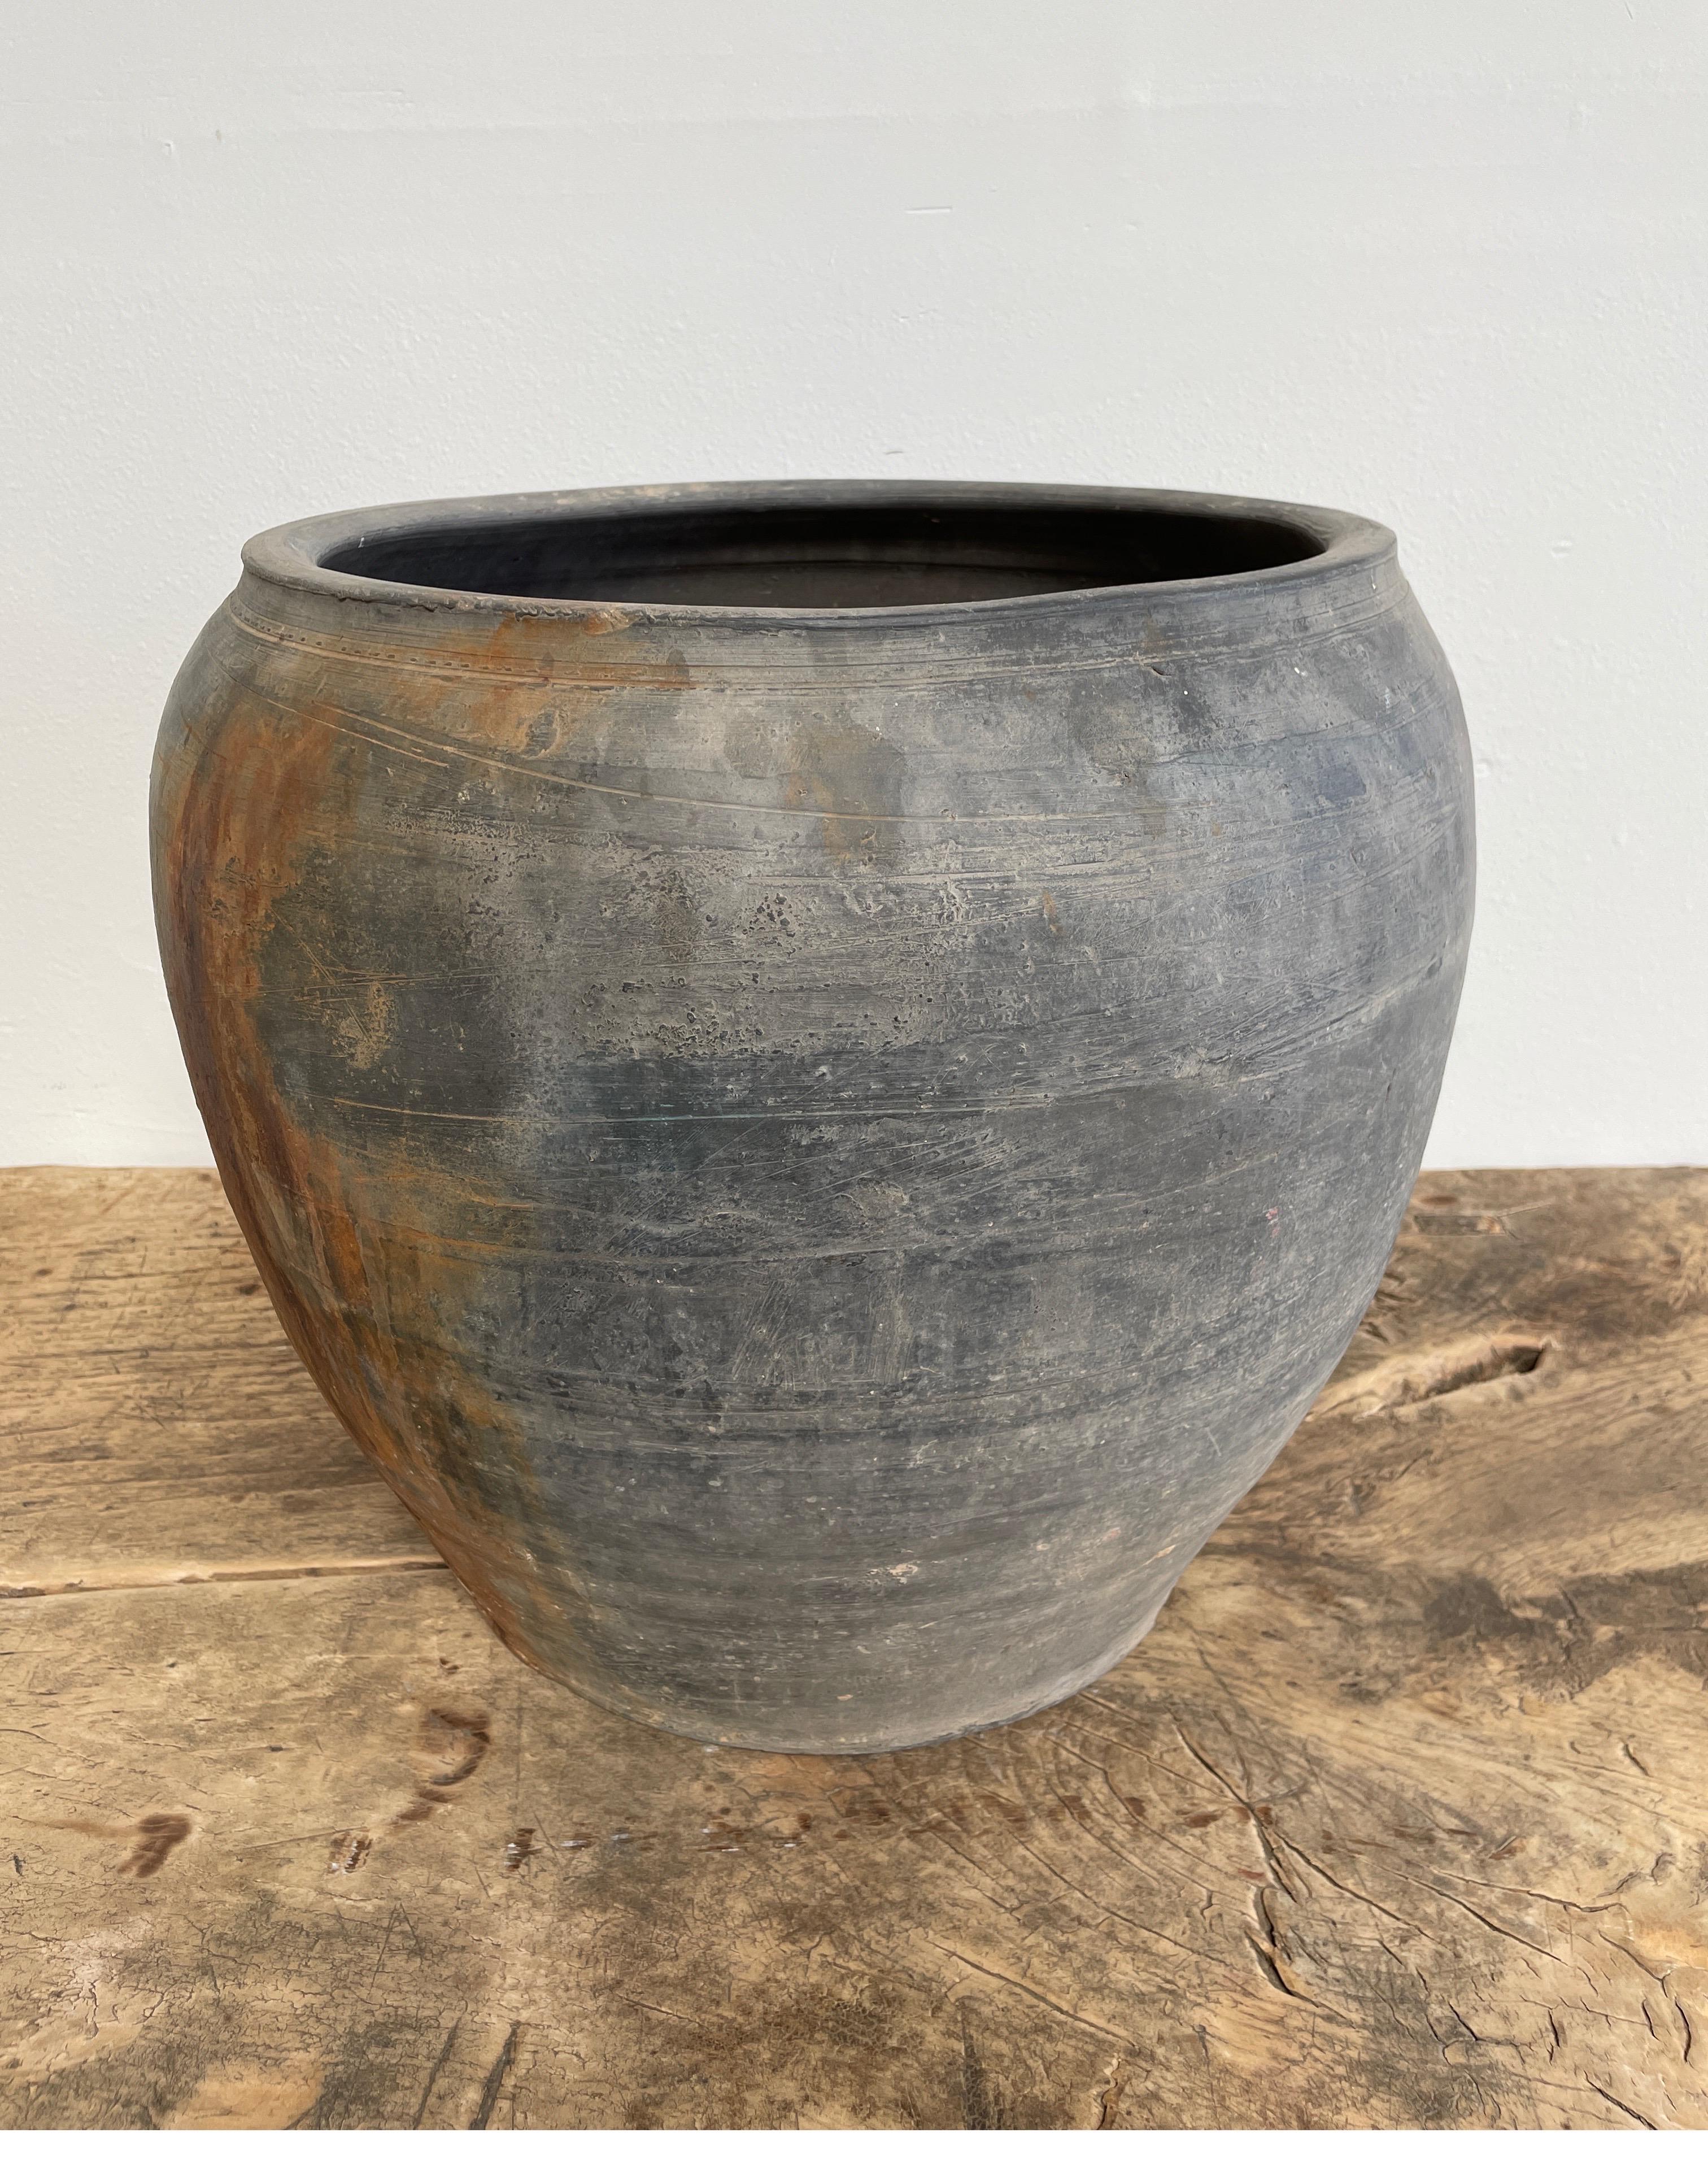 Vintage Pottery

Beautiful and rich in character, this vintage oil pot adds just the right amount of texture + warmth where you need it. Stunning faded black/ brown unglazed finish with warm terra-cotta accents.
Some have a more faded appearance